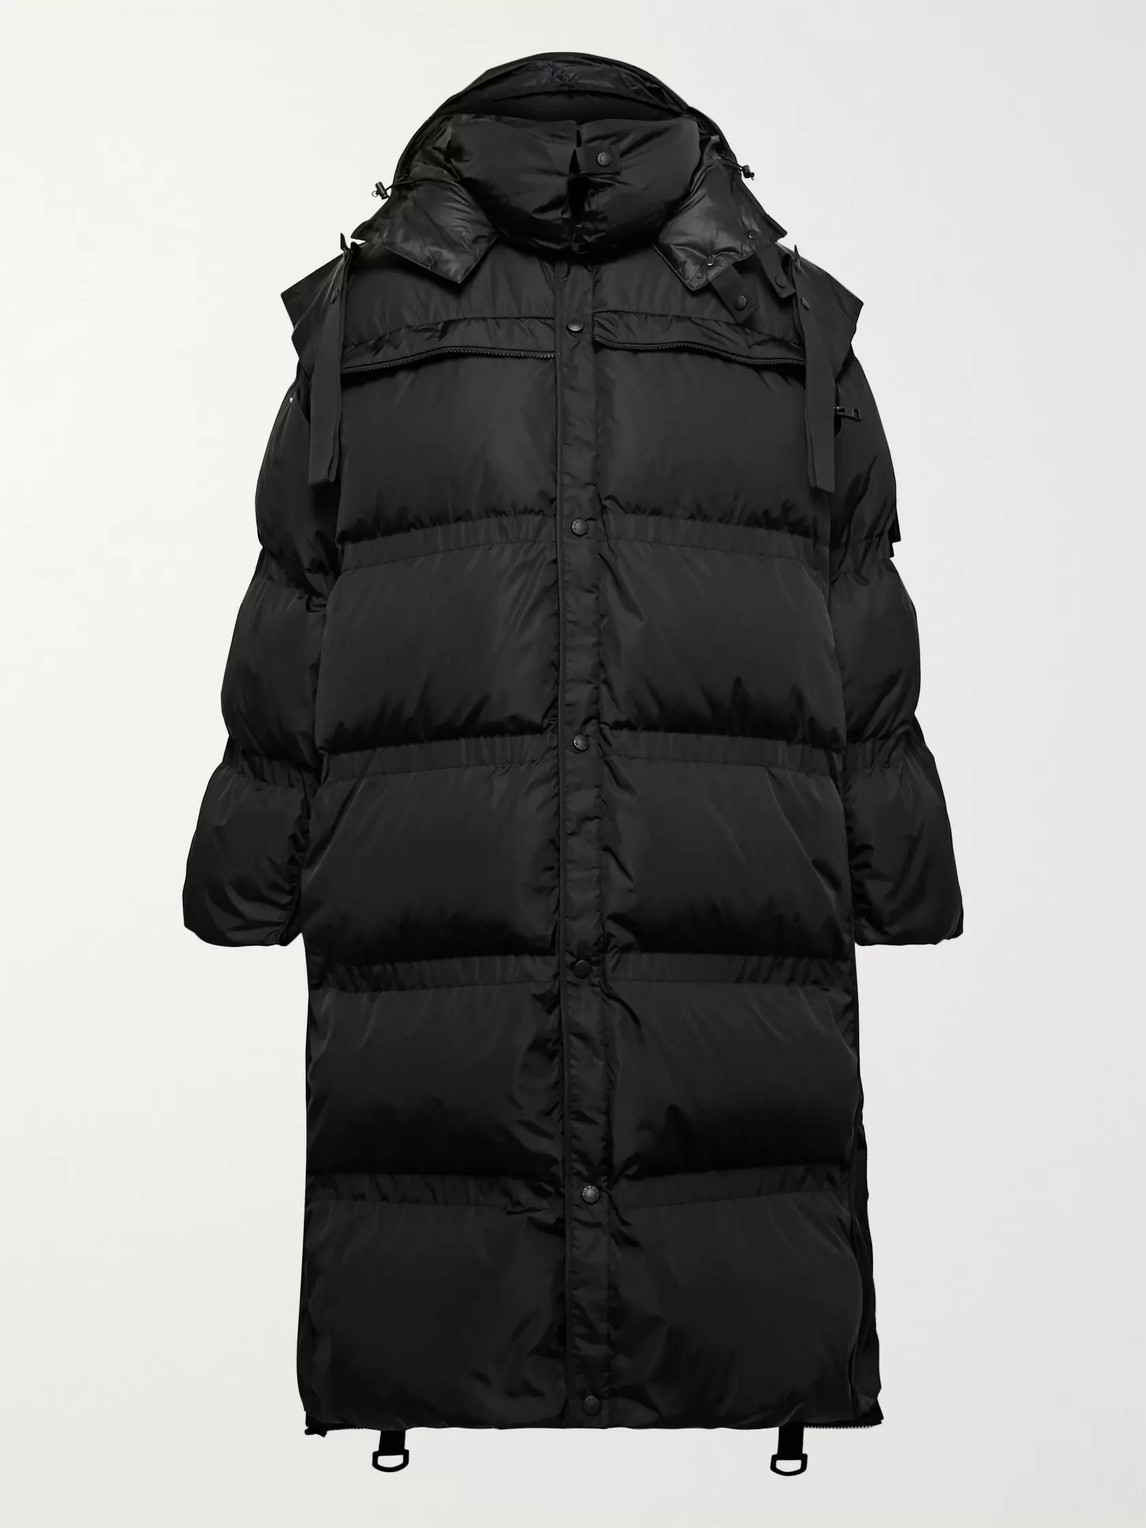 MONCLER GENIUS 5 MONCLER CRAIG GREEN SULLIVAN QUILTED SHELL HOODED DOWN PARKA